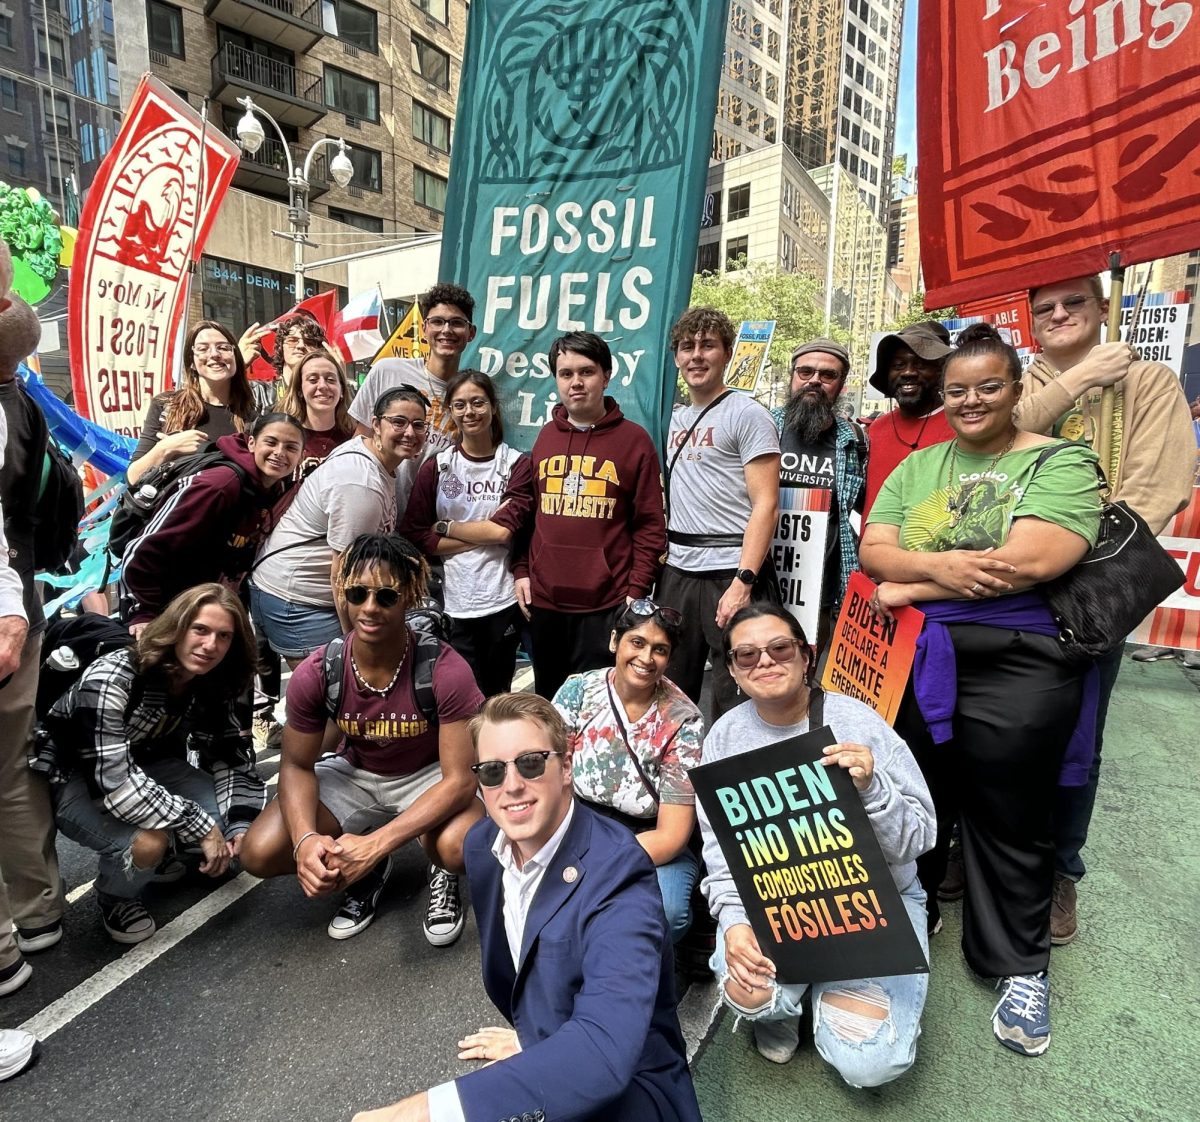 Iona+attends+march+against+fossil+fuels+ahead+of+UN+Summit.